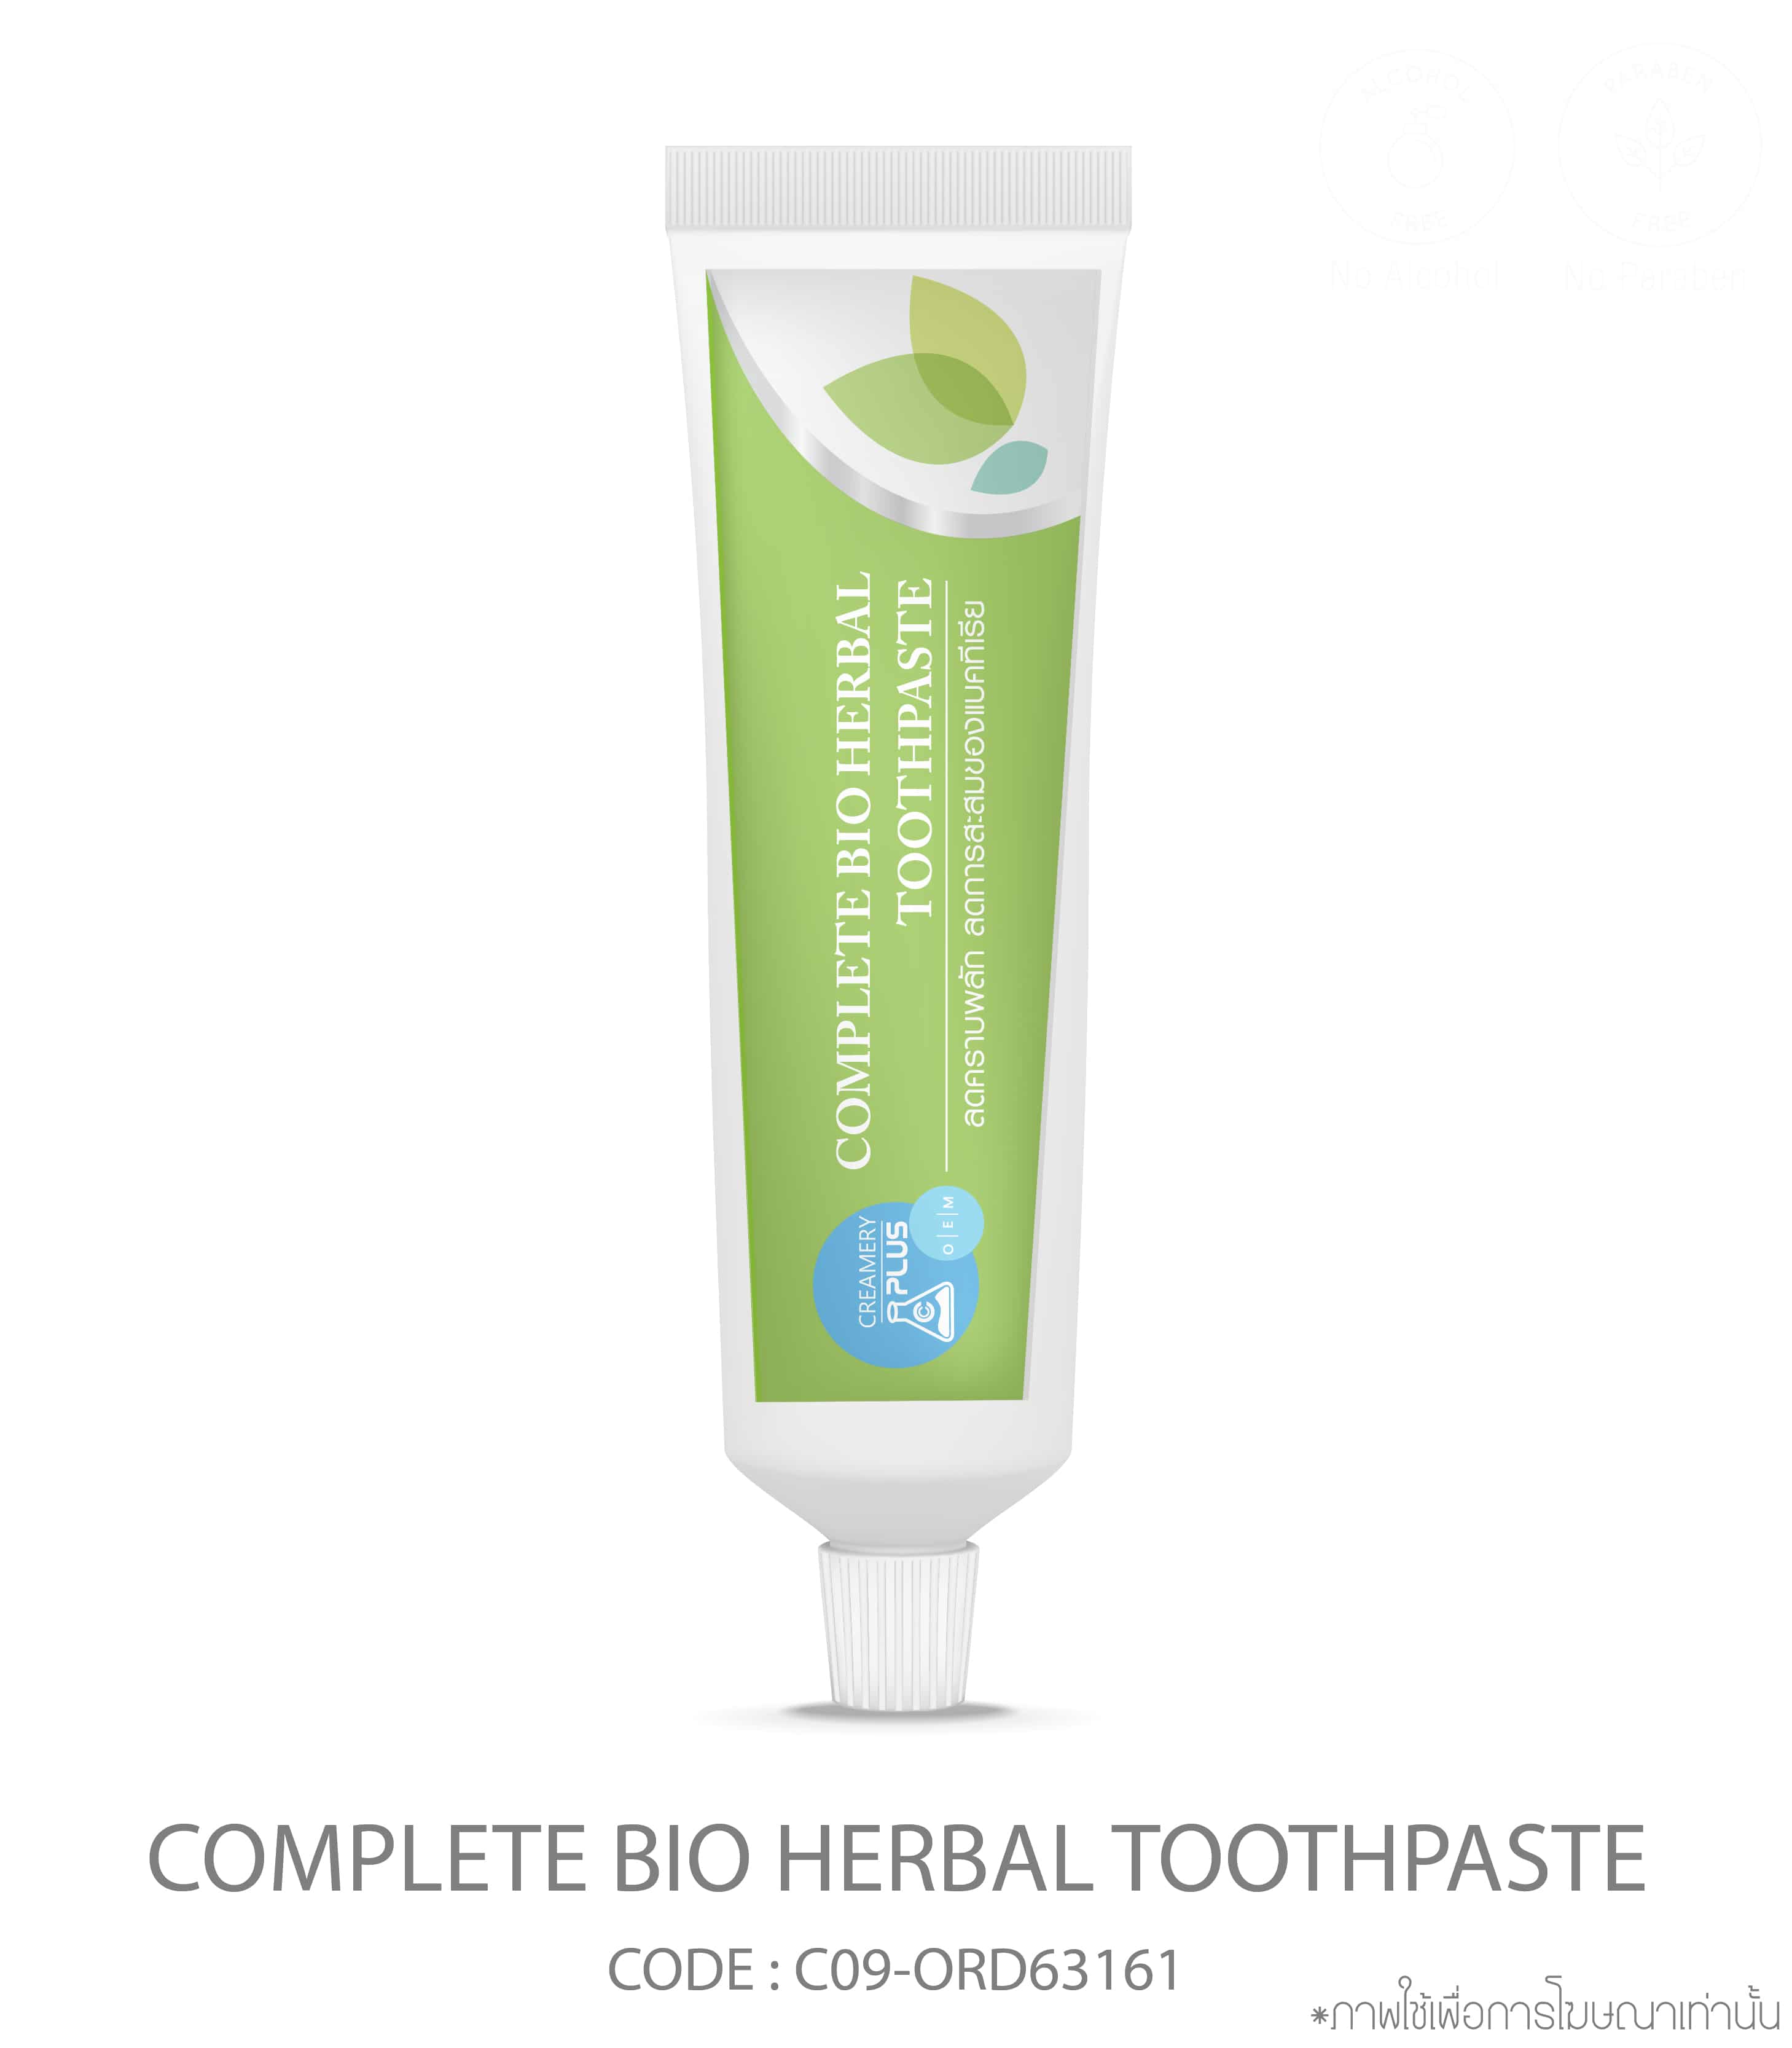 Complete bio herbal toothpaste